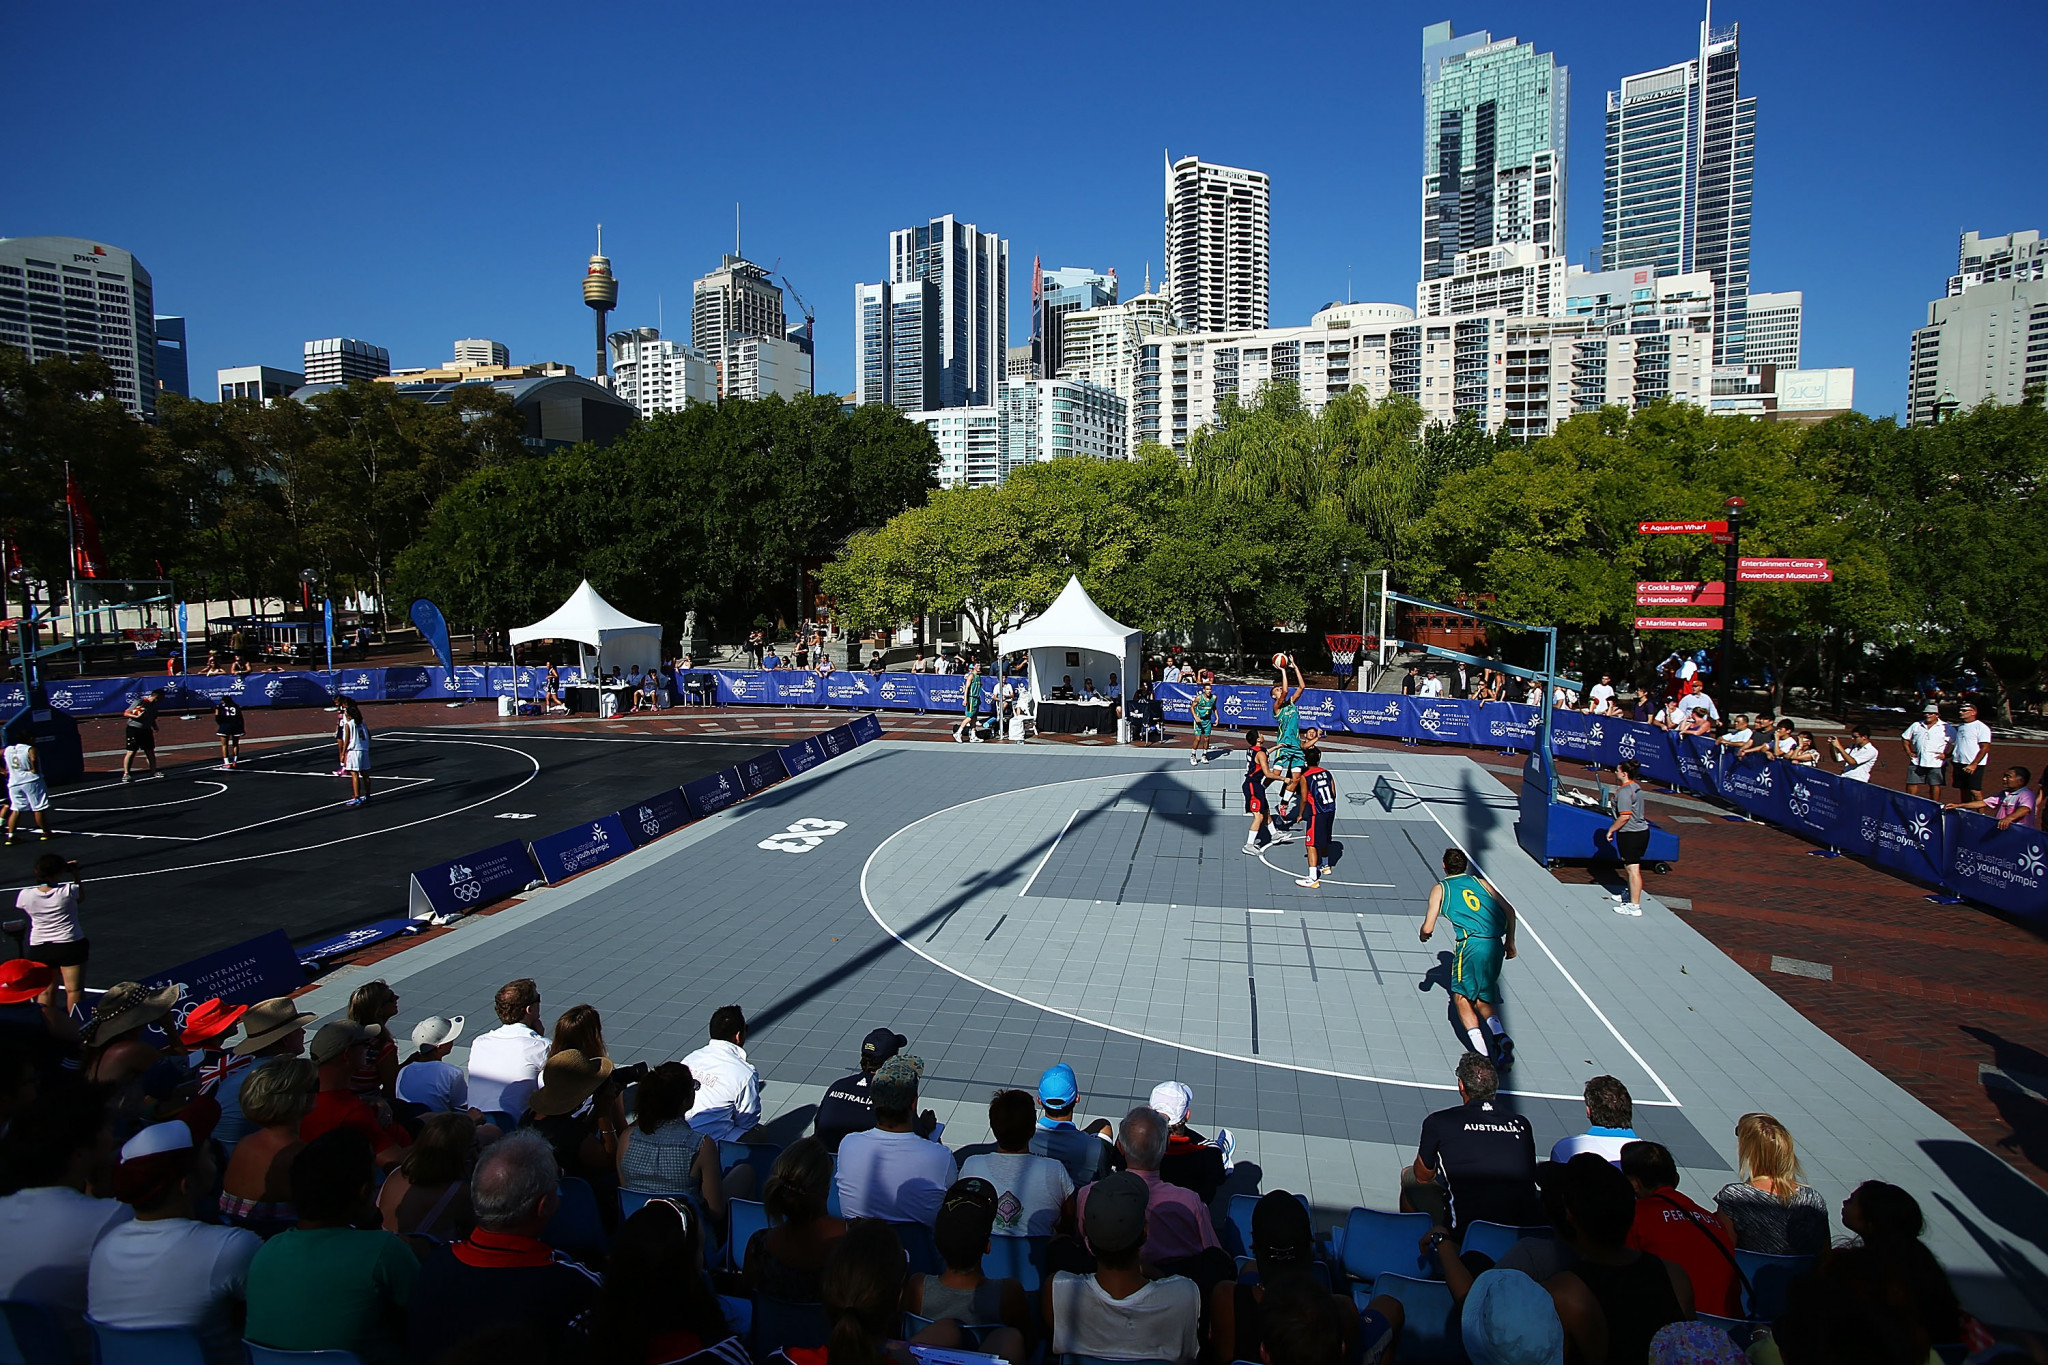 The 3x3 event will allow athletes the chance to earn a spot on the FIBA World Tour ©Getty Images